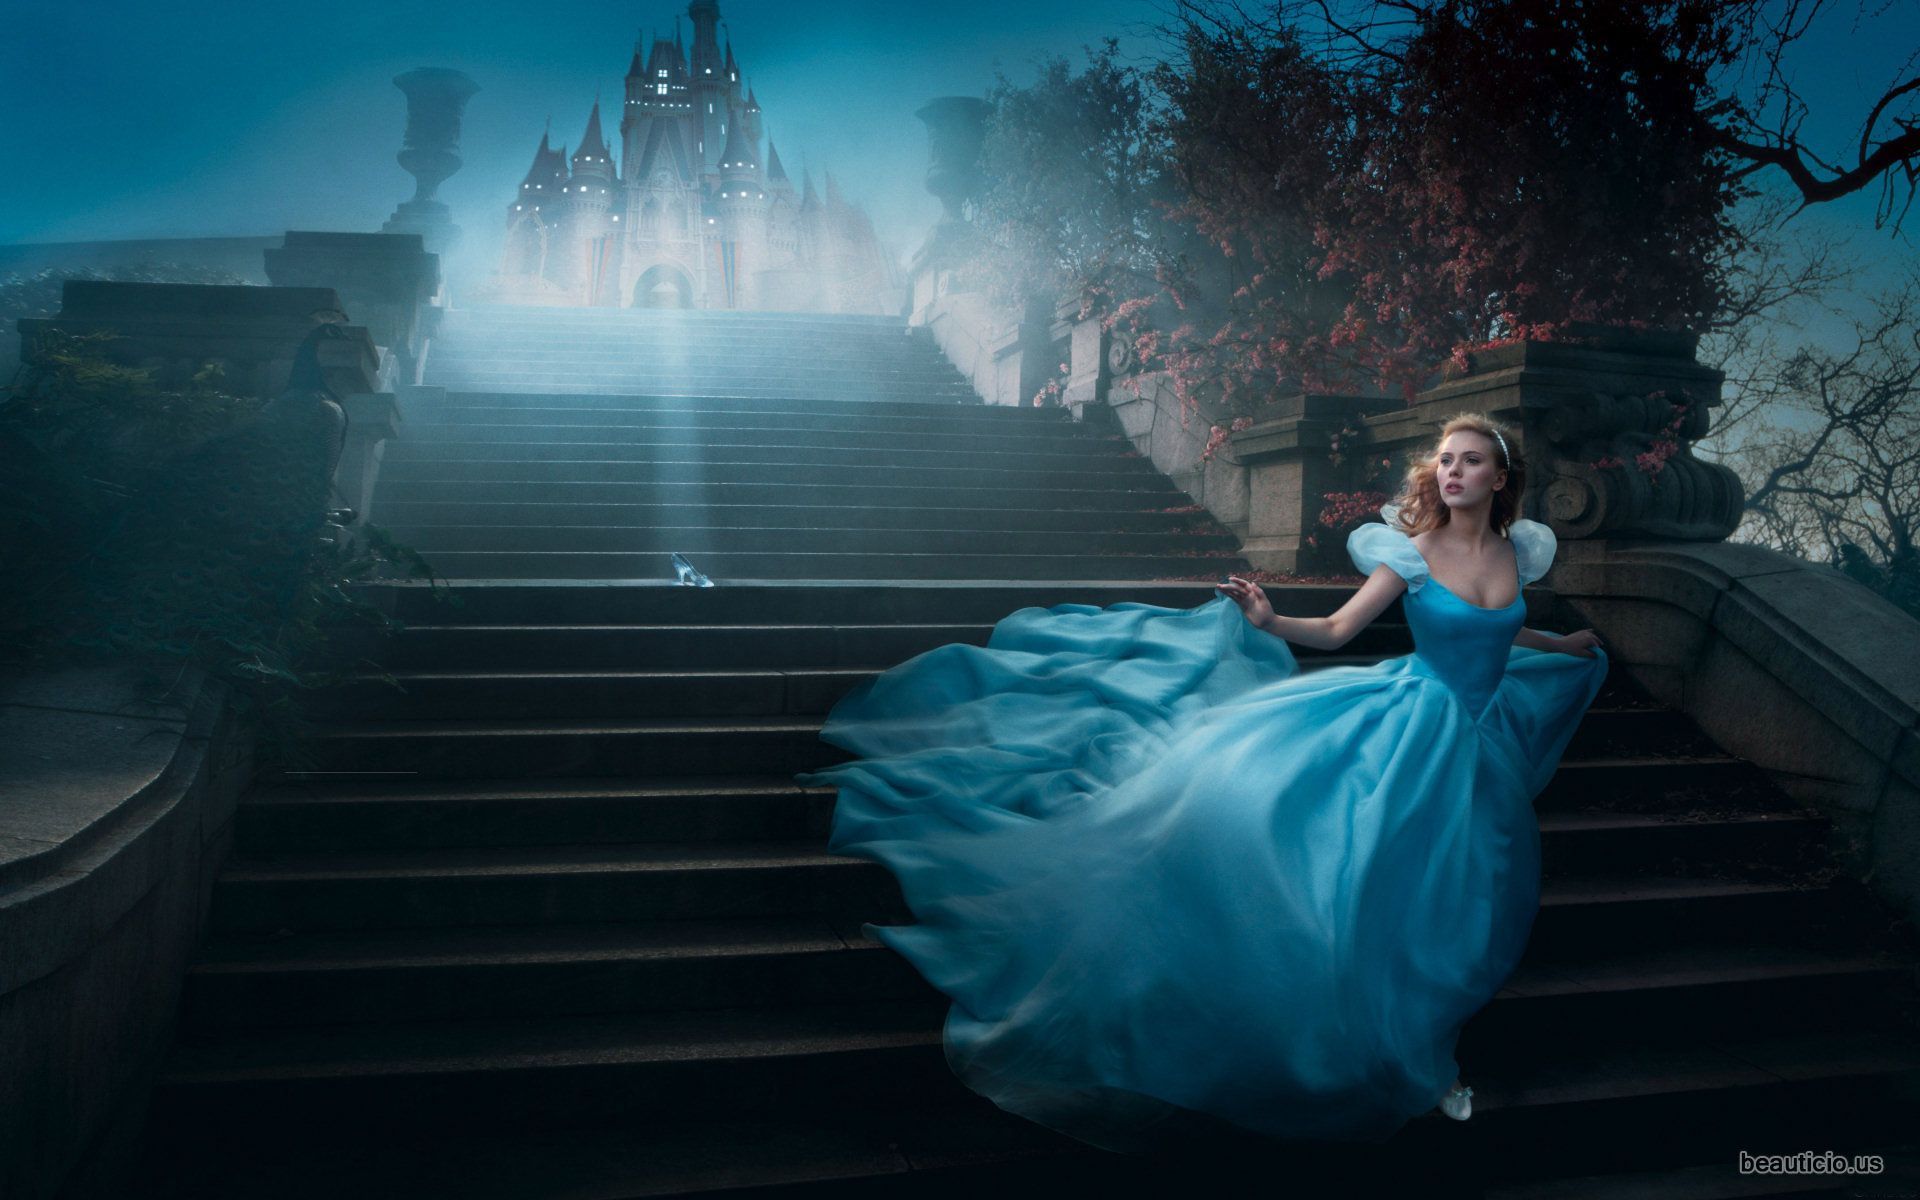 Cinderella 4K wallpaper for your desktop or mobile screen free and easy to download